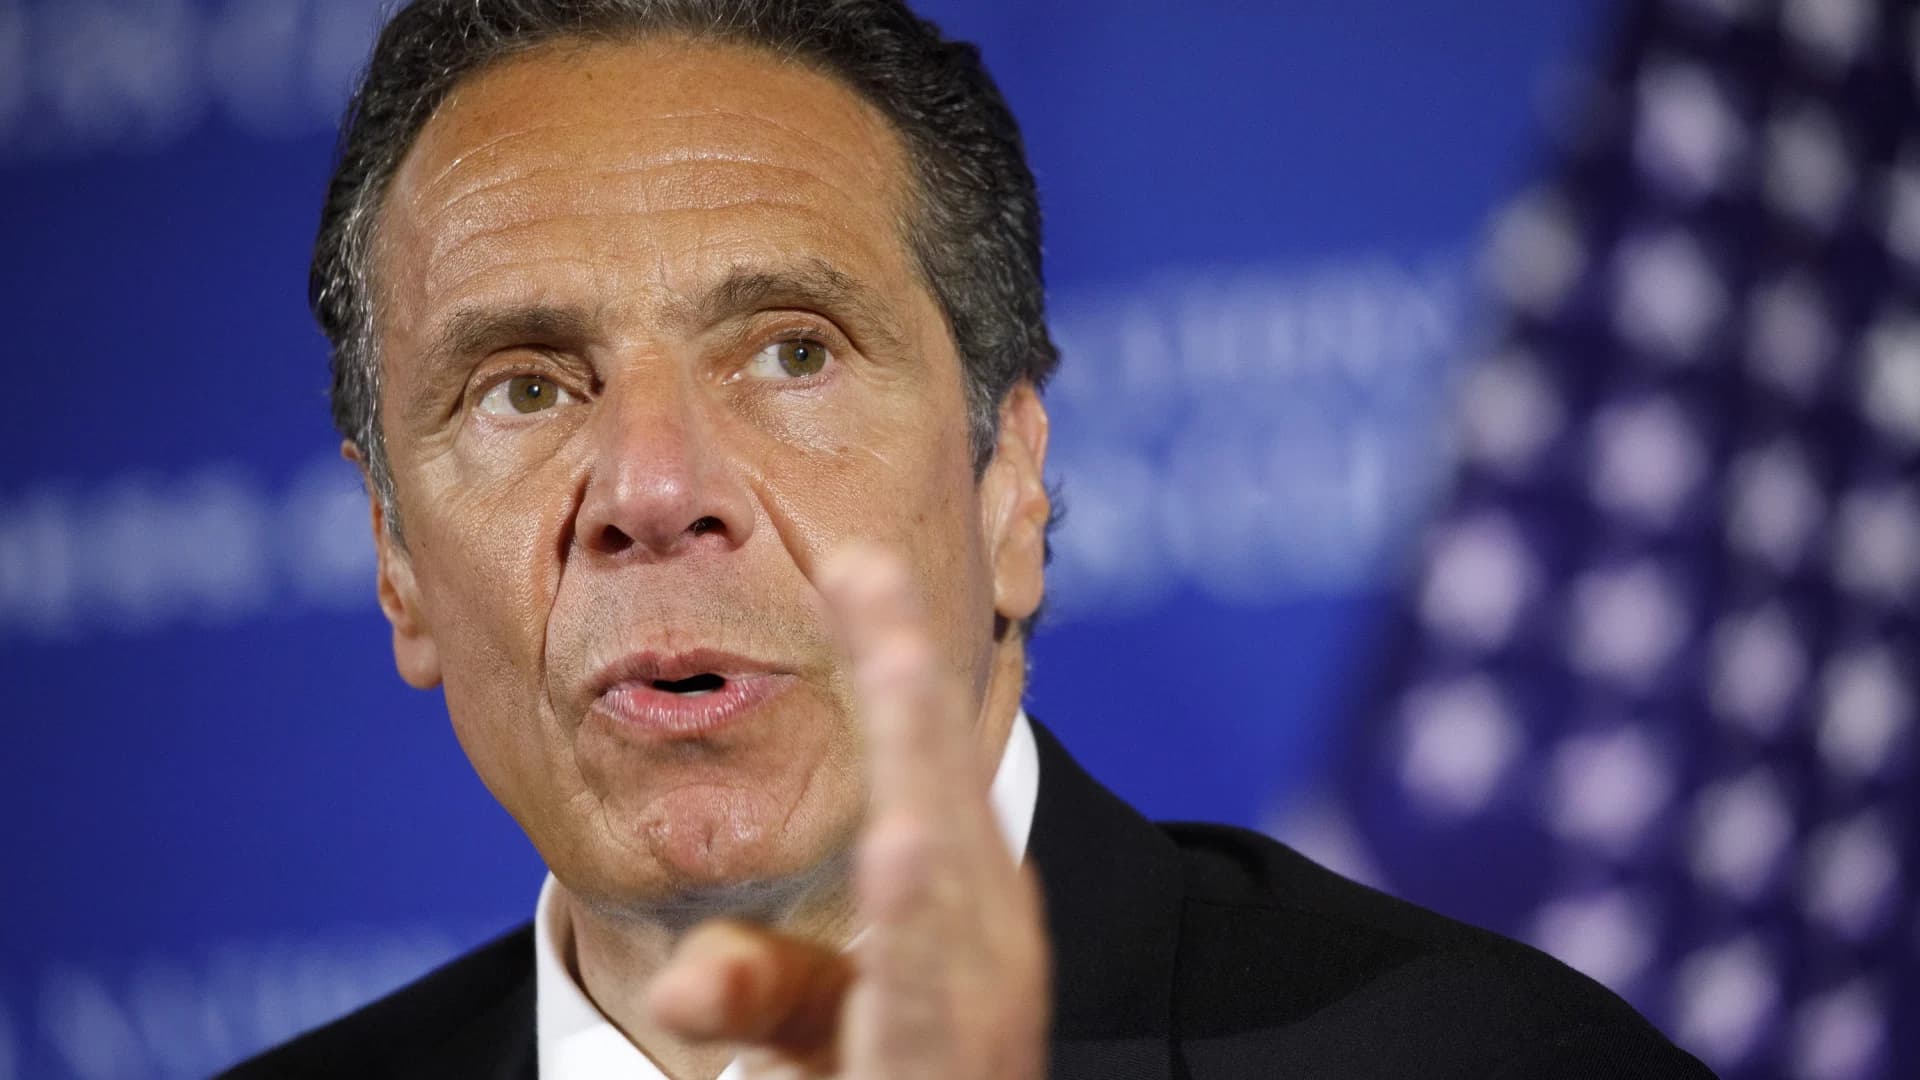 Cuomo questions apparent fed plan that will ask COVID-19 vaccine patients for ID number